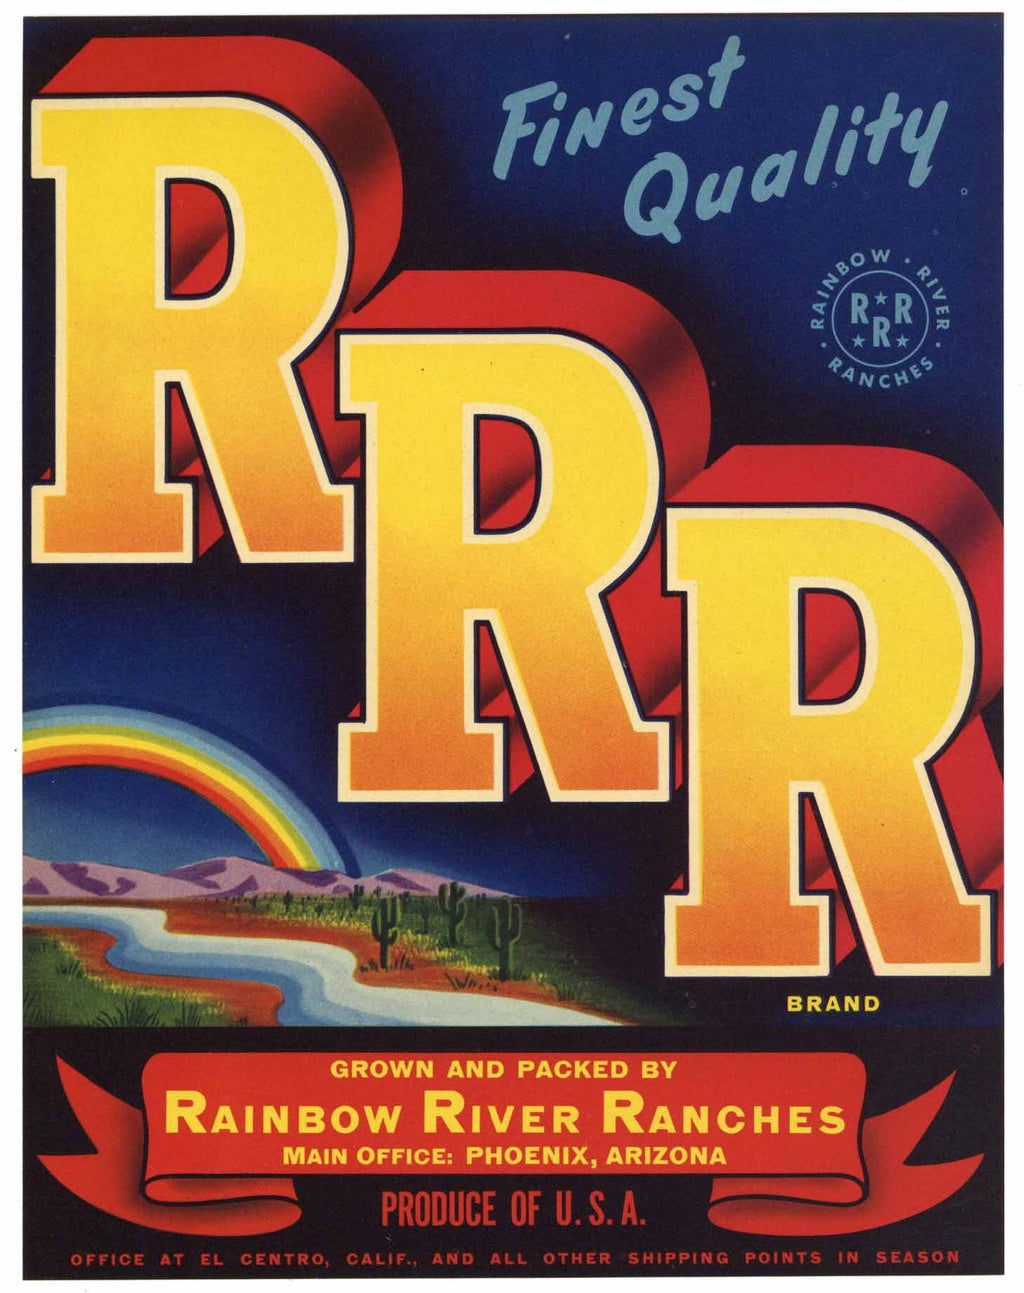 RRR Brand Vintage Rainbow River Ranches Vegetable Crate Label